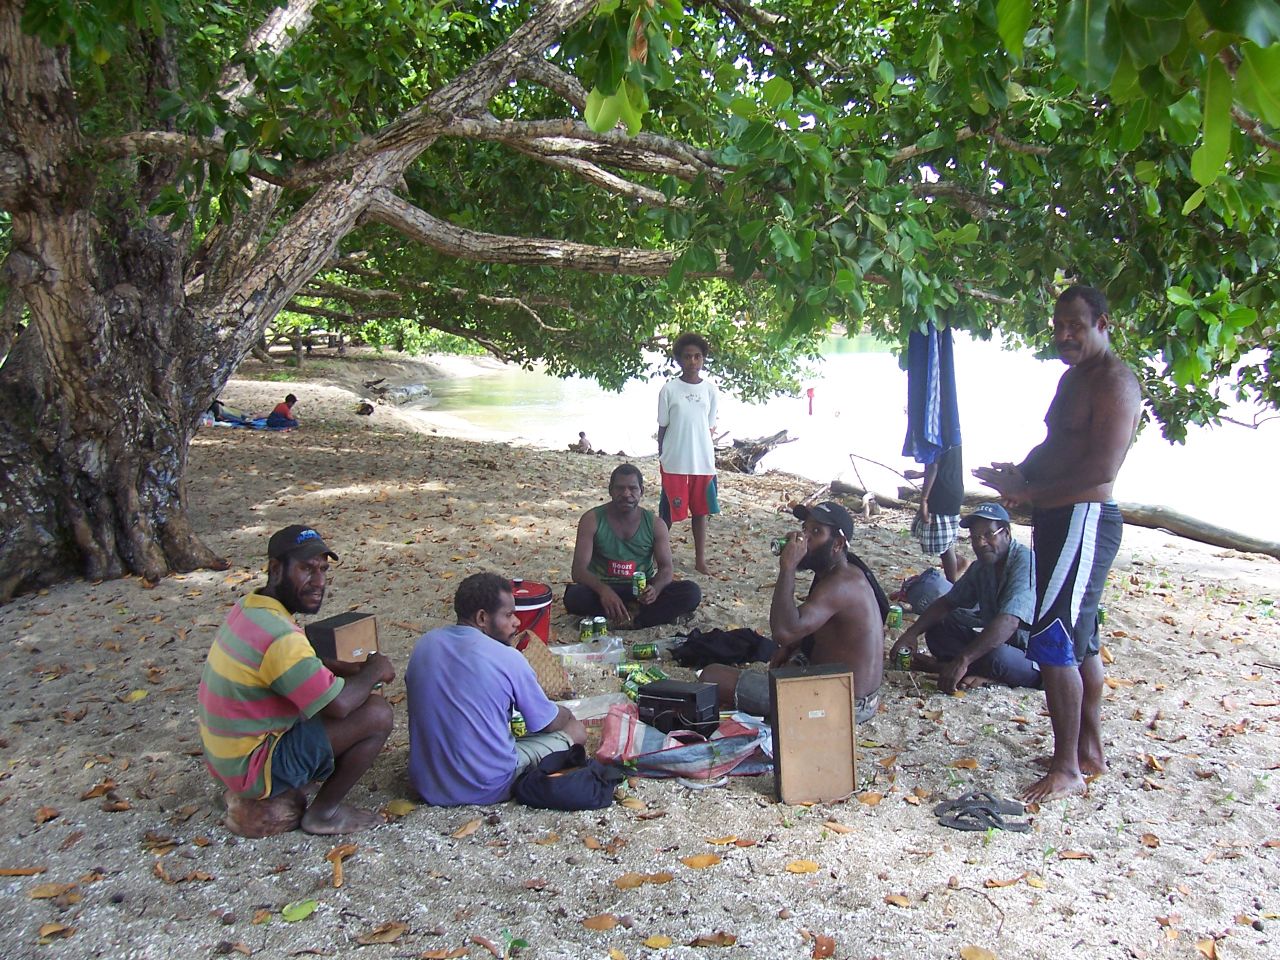 a group of people sitting underneath the shade of trees